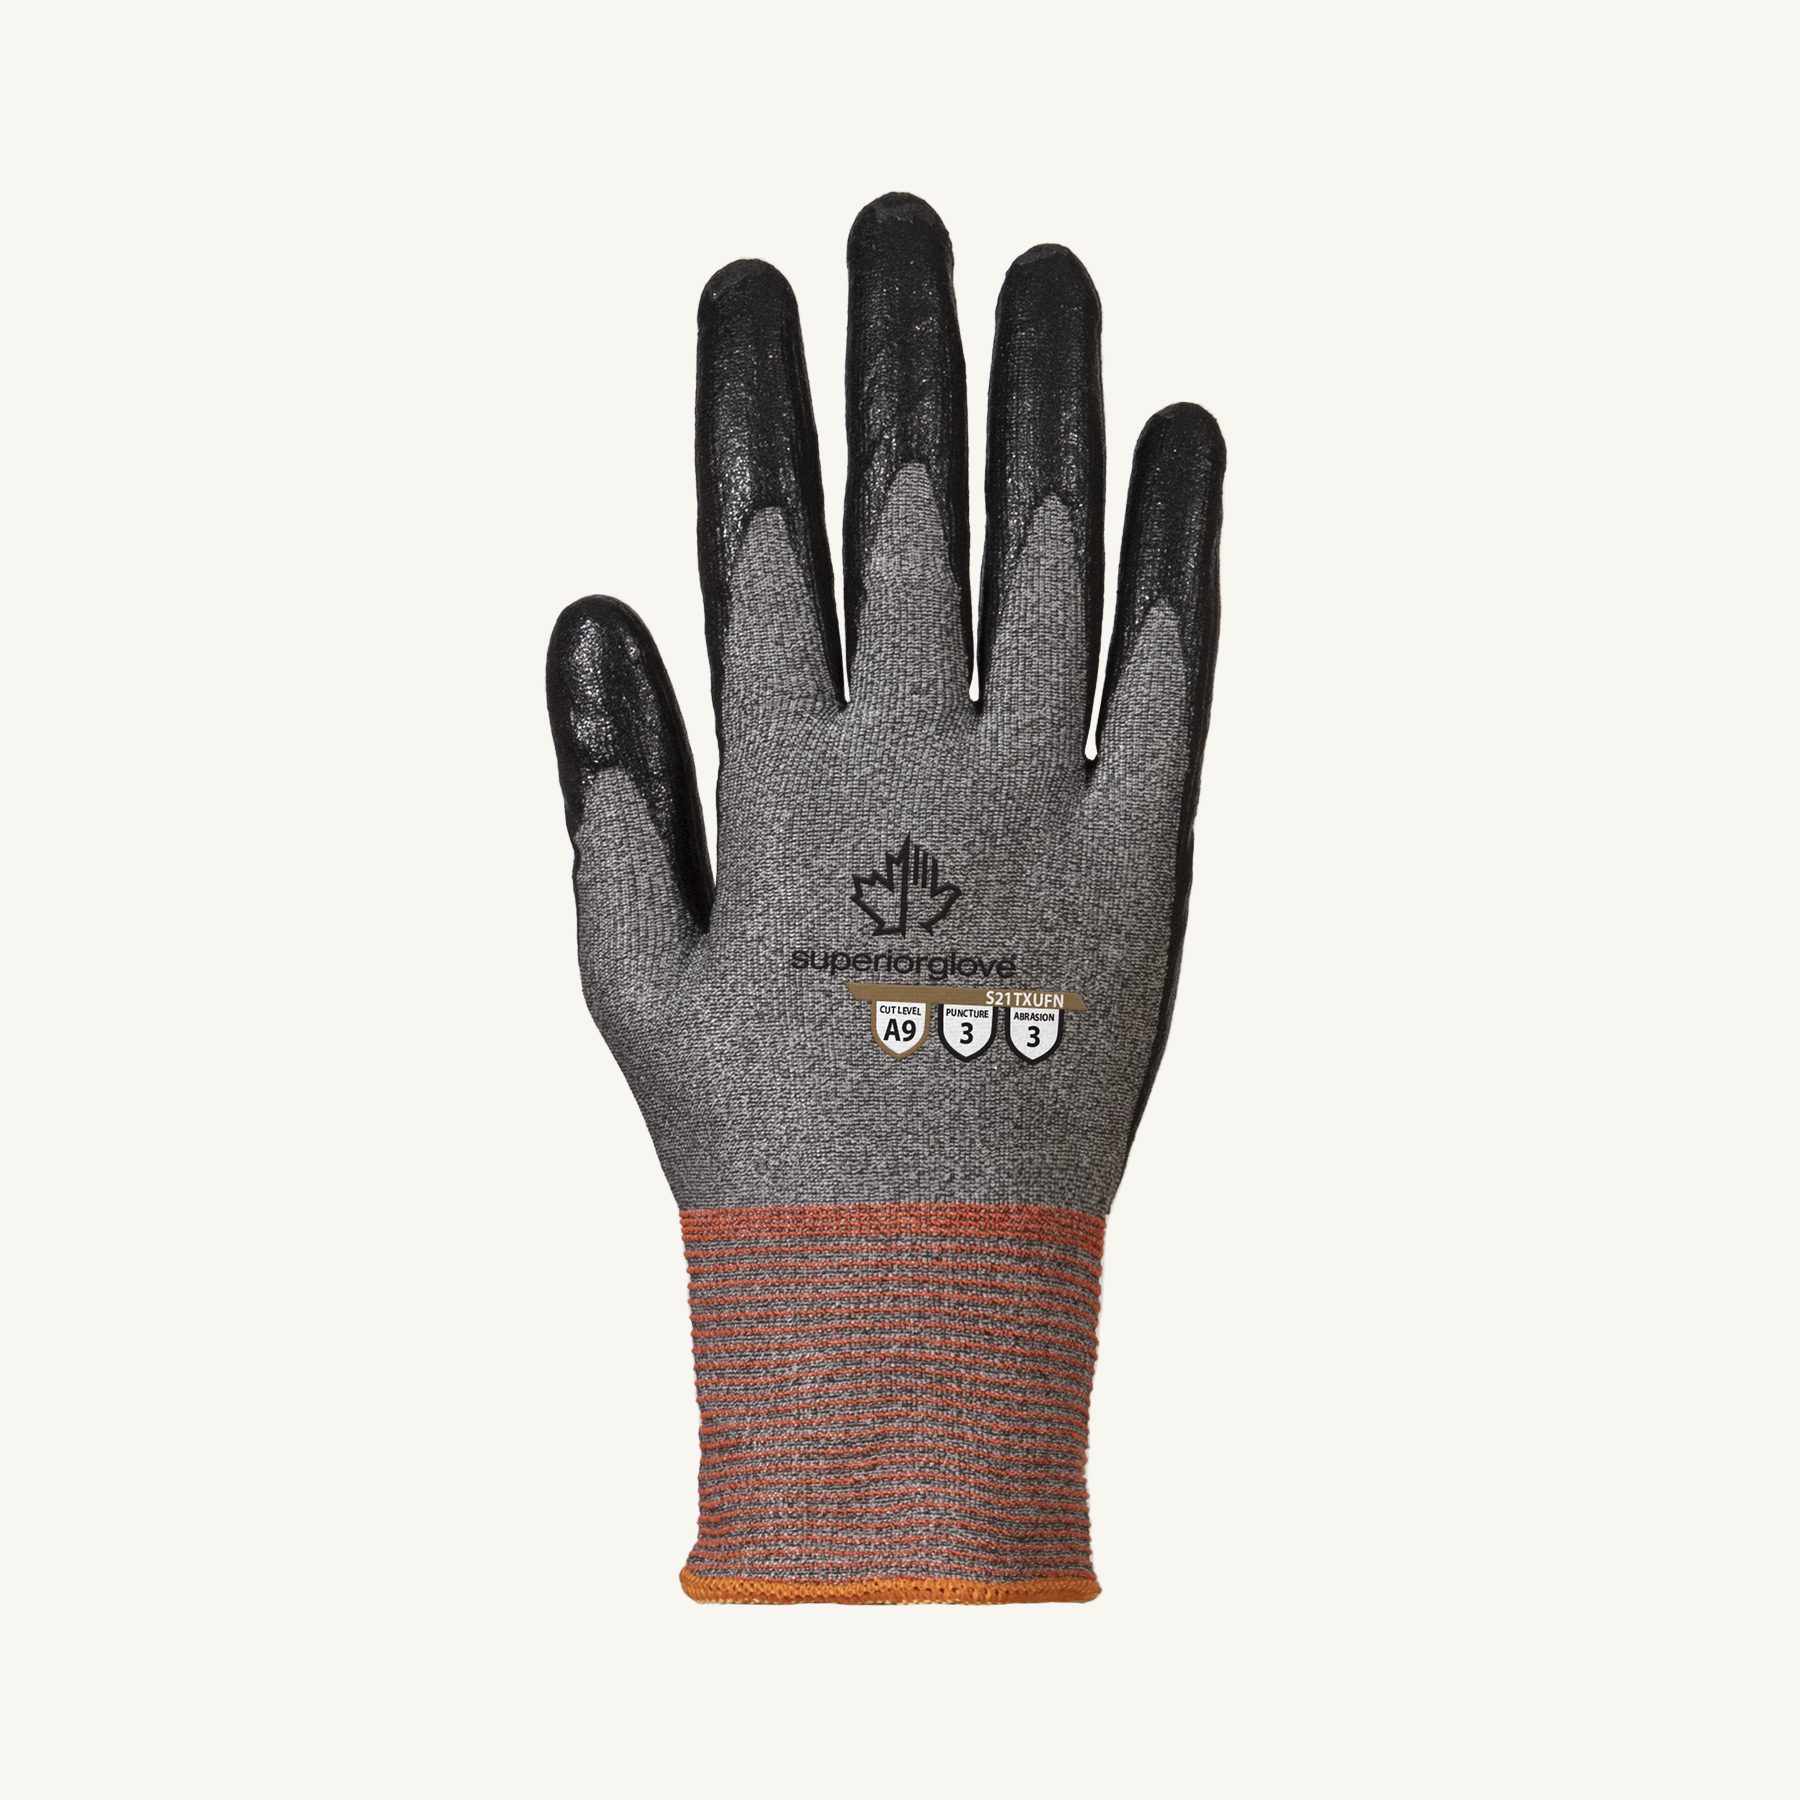 Superior Glove® TenActiv™ S21TXUFN Nitrile Coated Touchscreen A9 Extreme-Cut Gloves